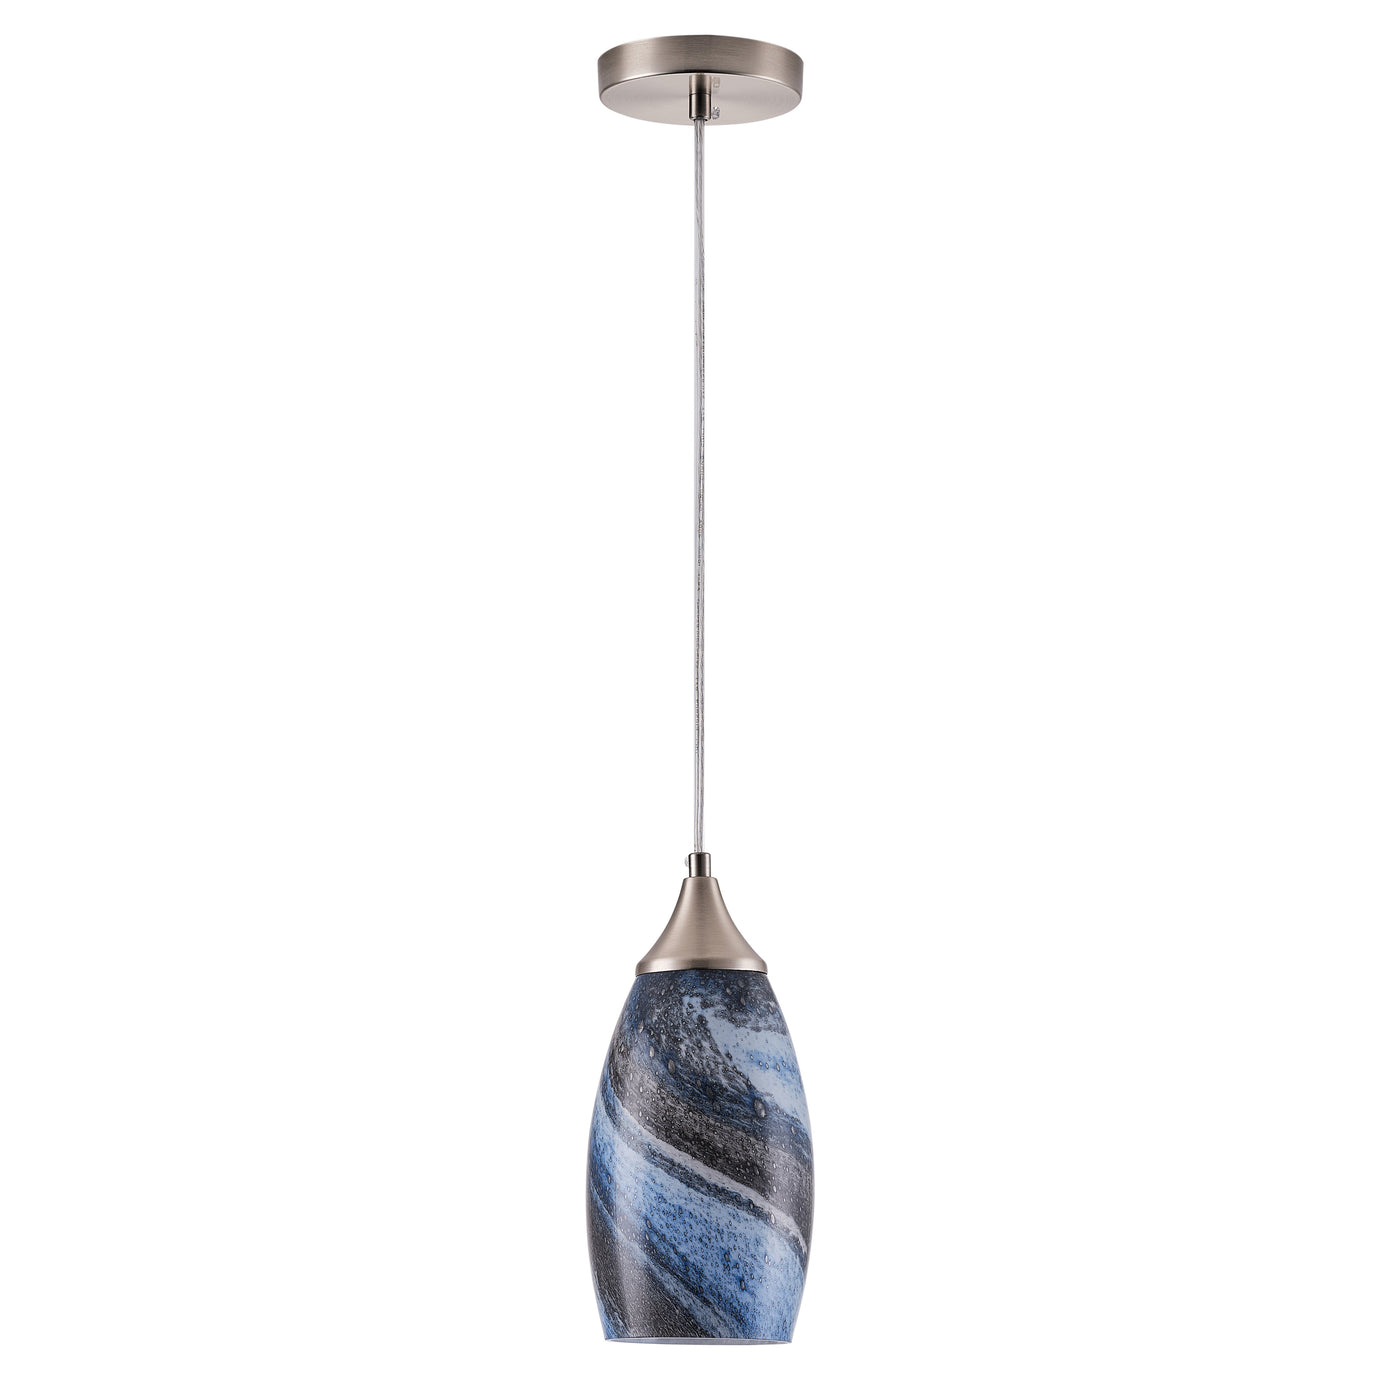 1-Light Hourglass Shape With Special Texture Pendant Lighting